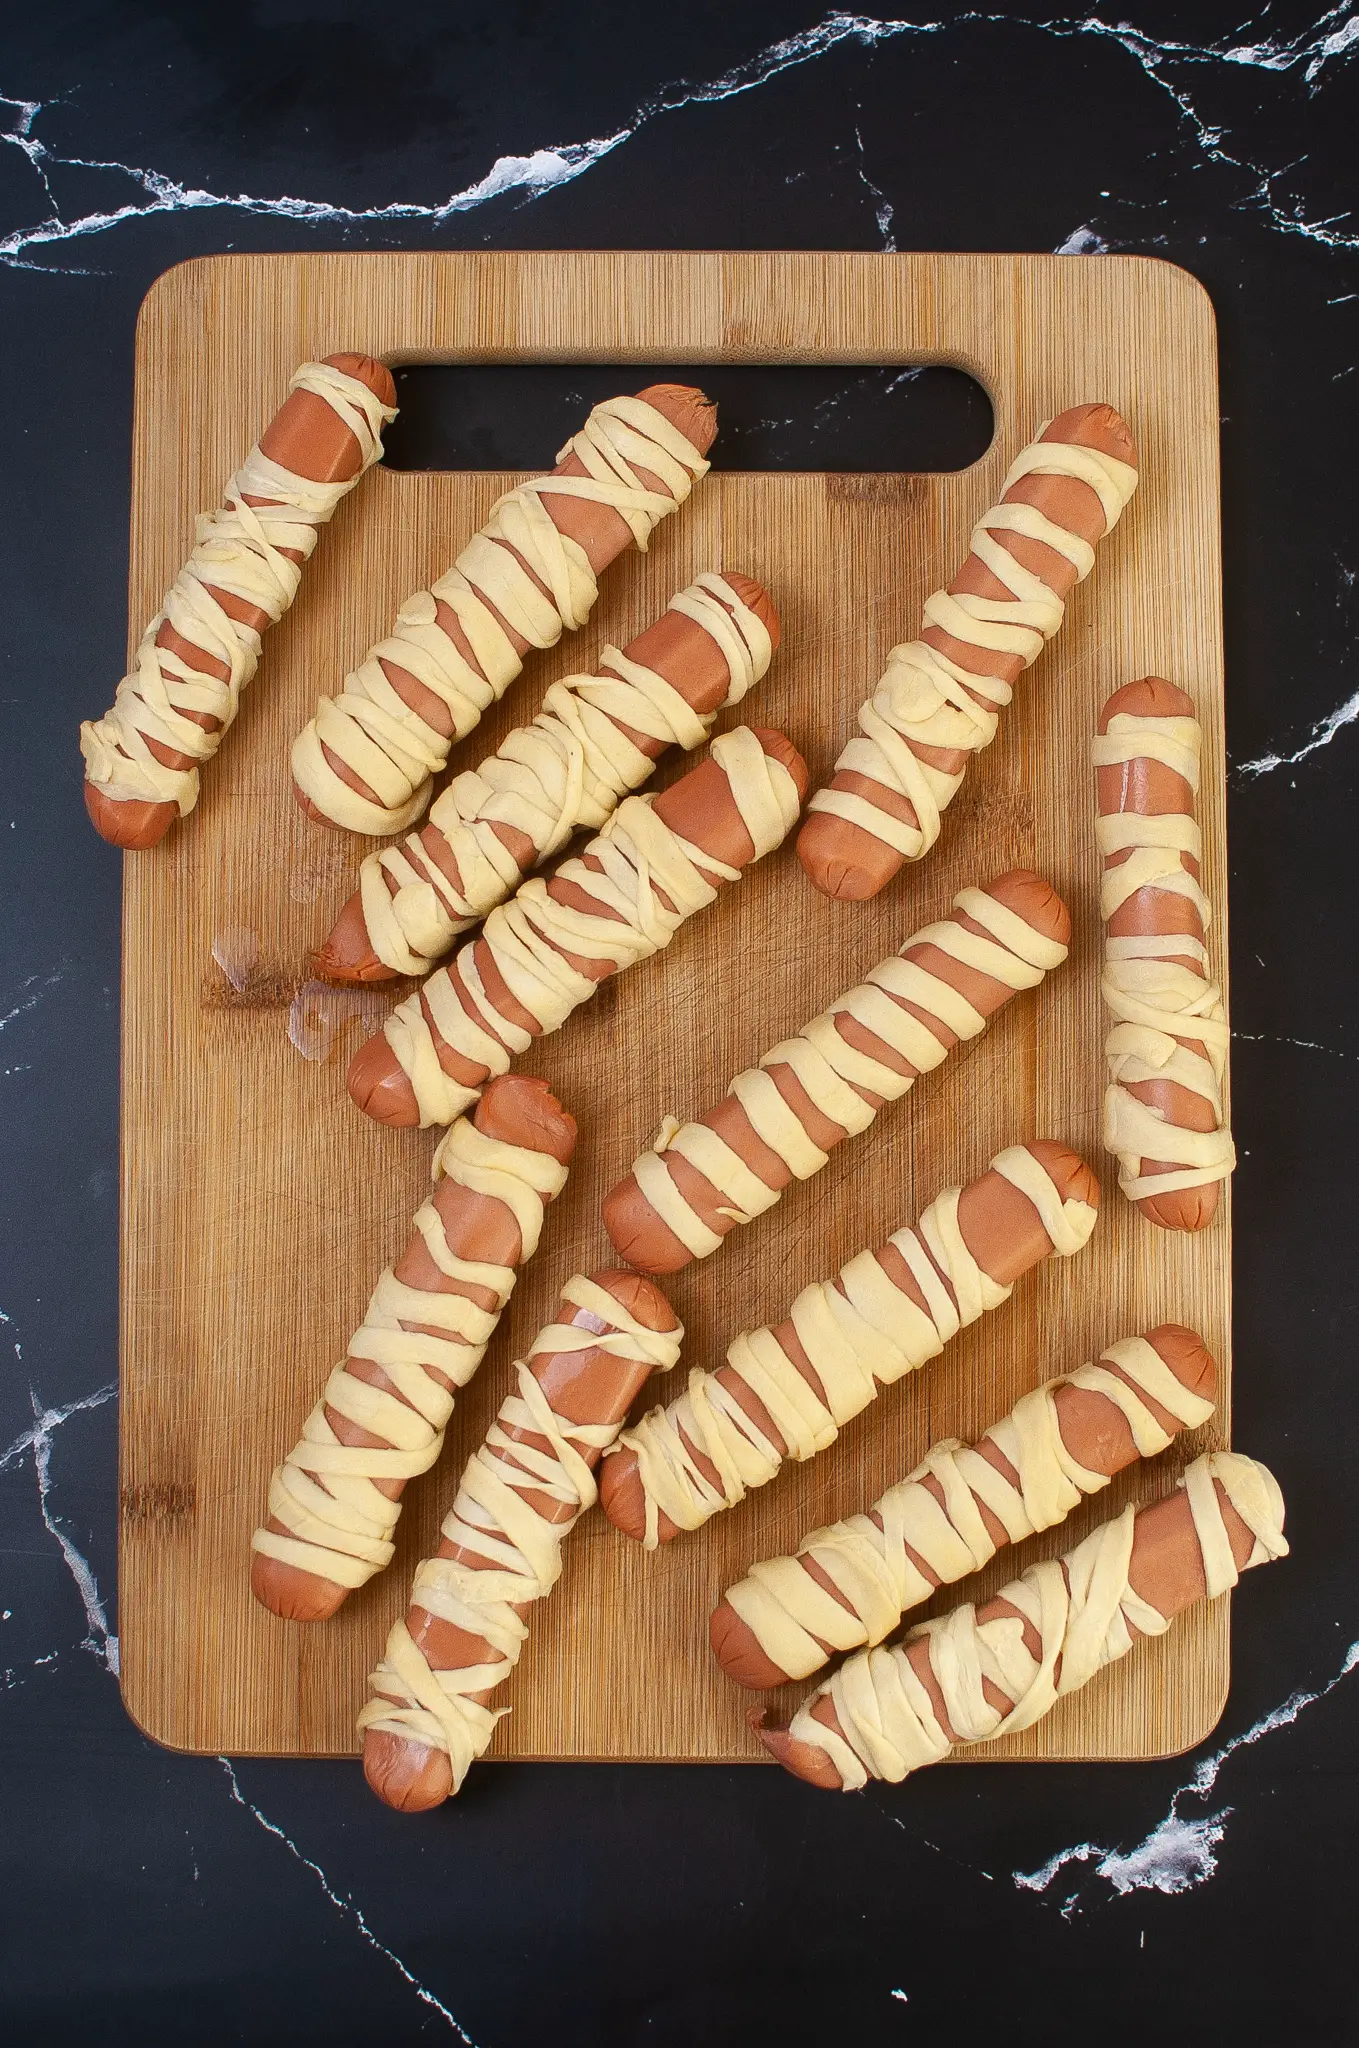 Hot dogs are wrapped in strips of crescent rolls.